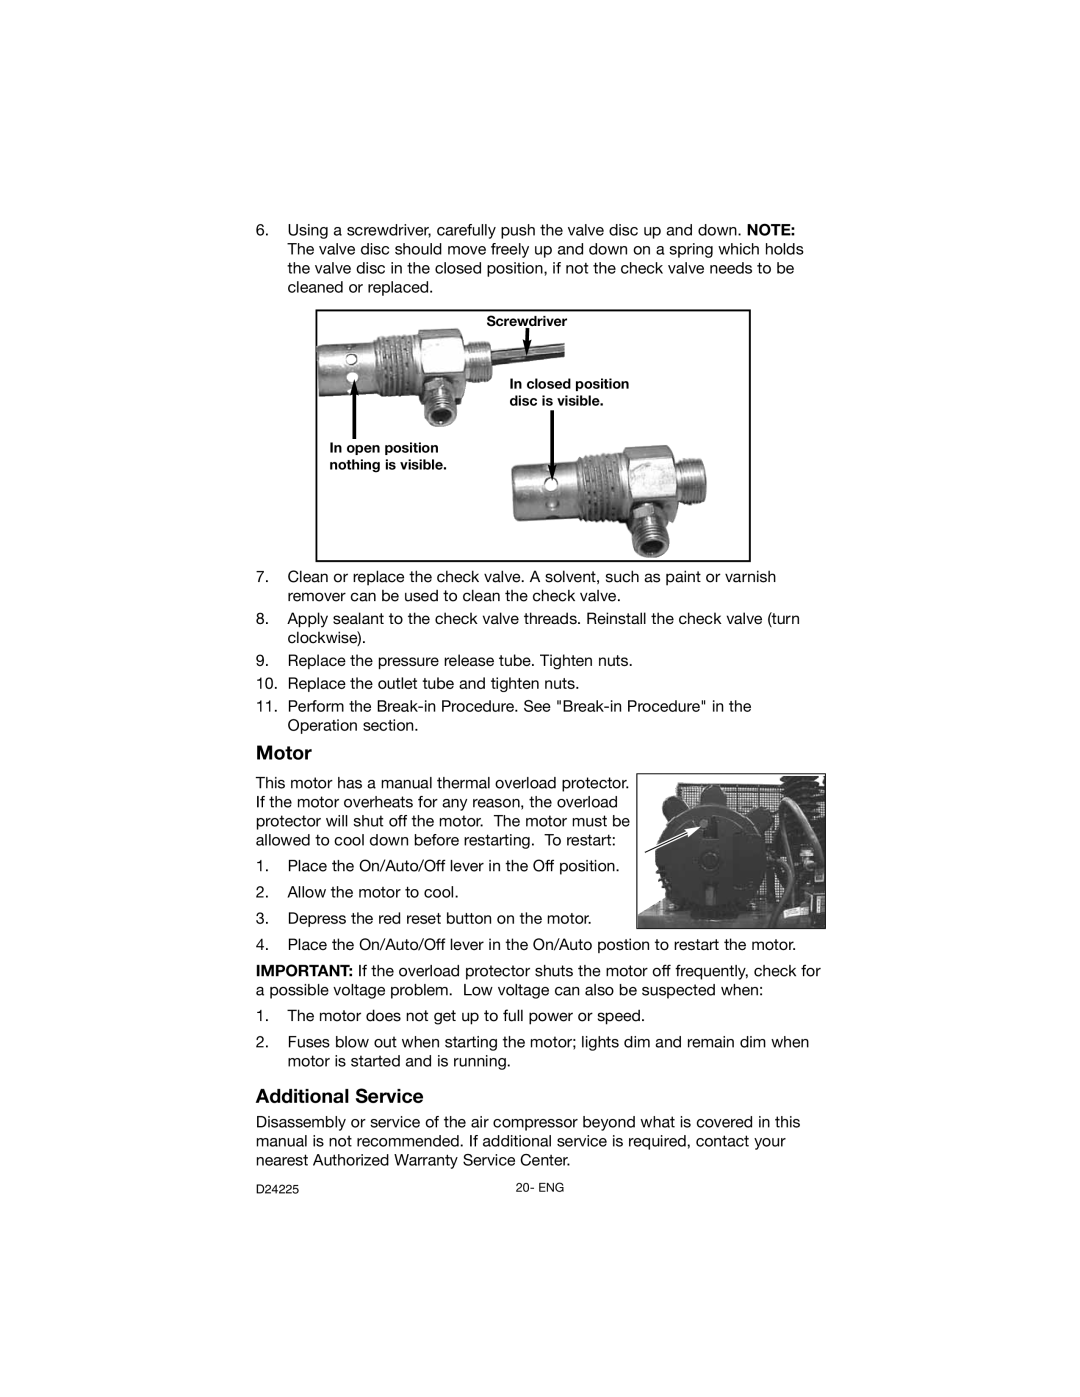 Porter-Cable D24225-049-2 instruction manual Motor, Additional Service, Screwdriver 